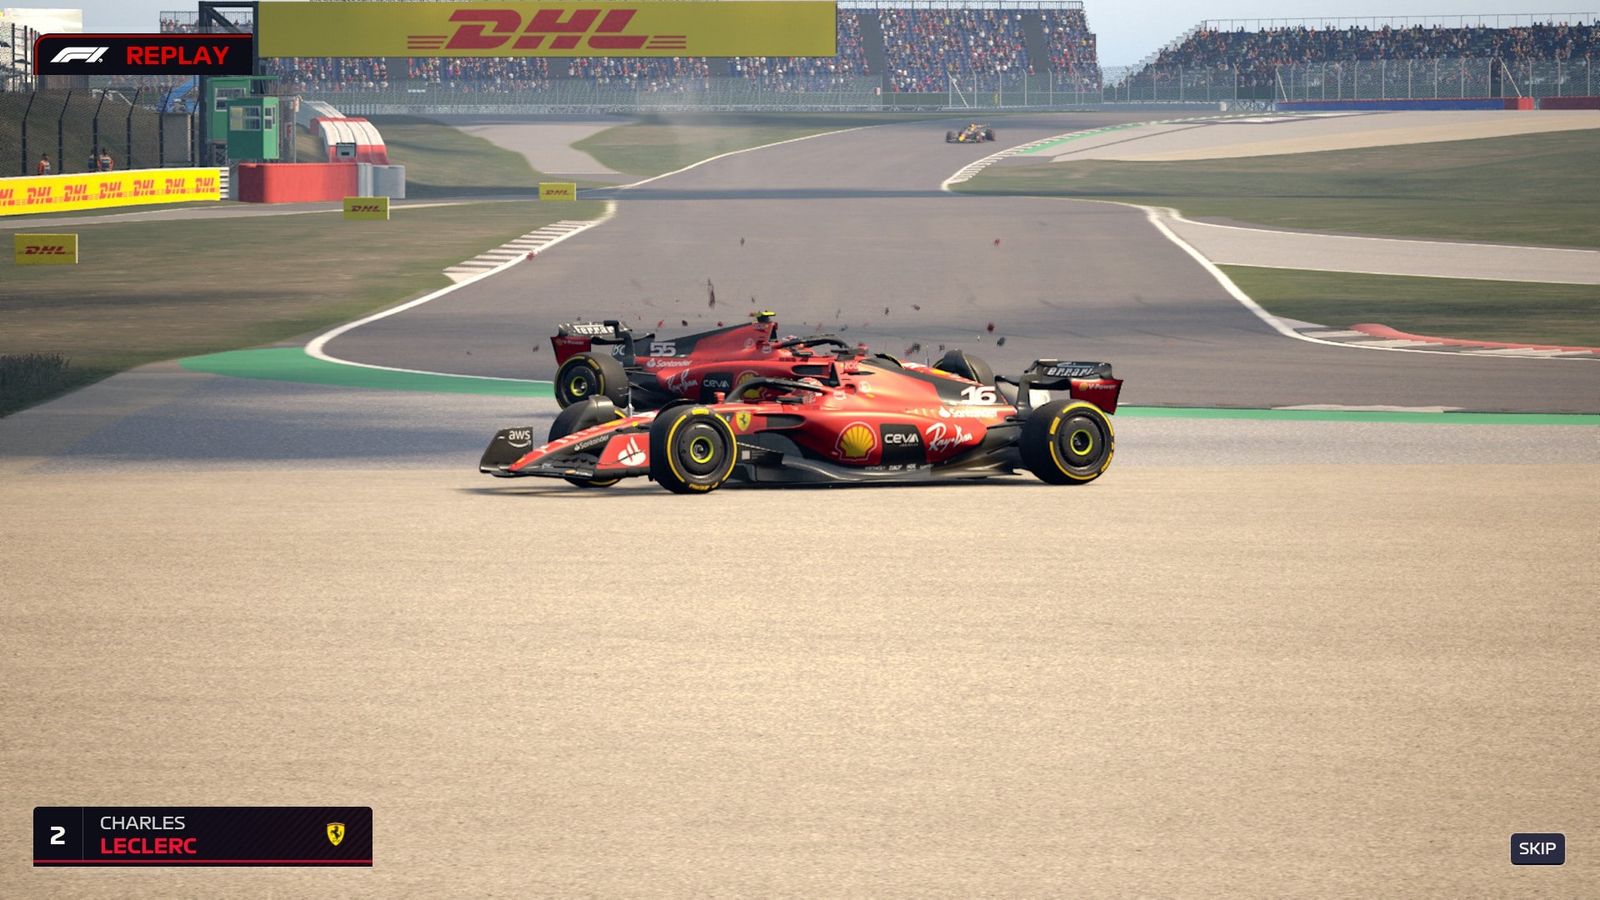 The two Ferraris collide at Silverstone in F1 Manager 2023